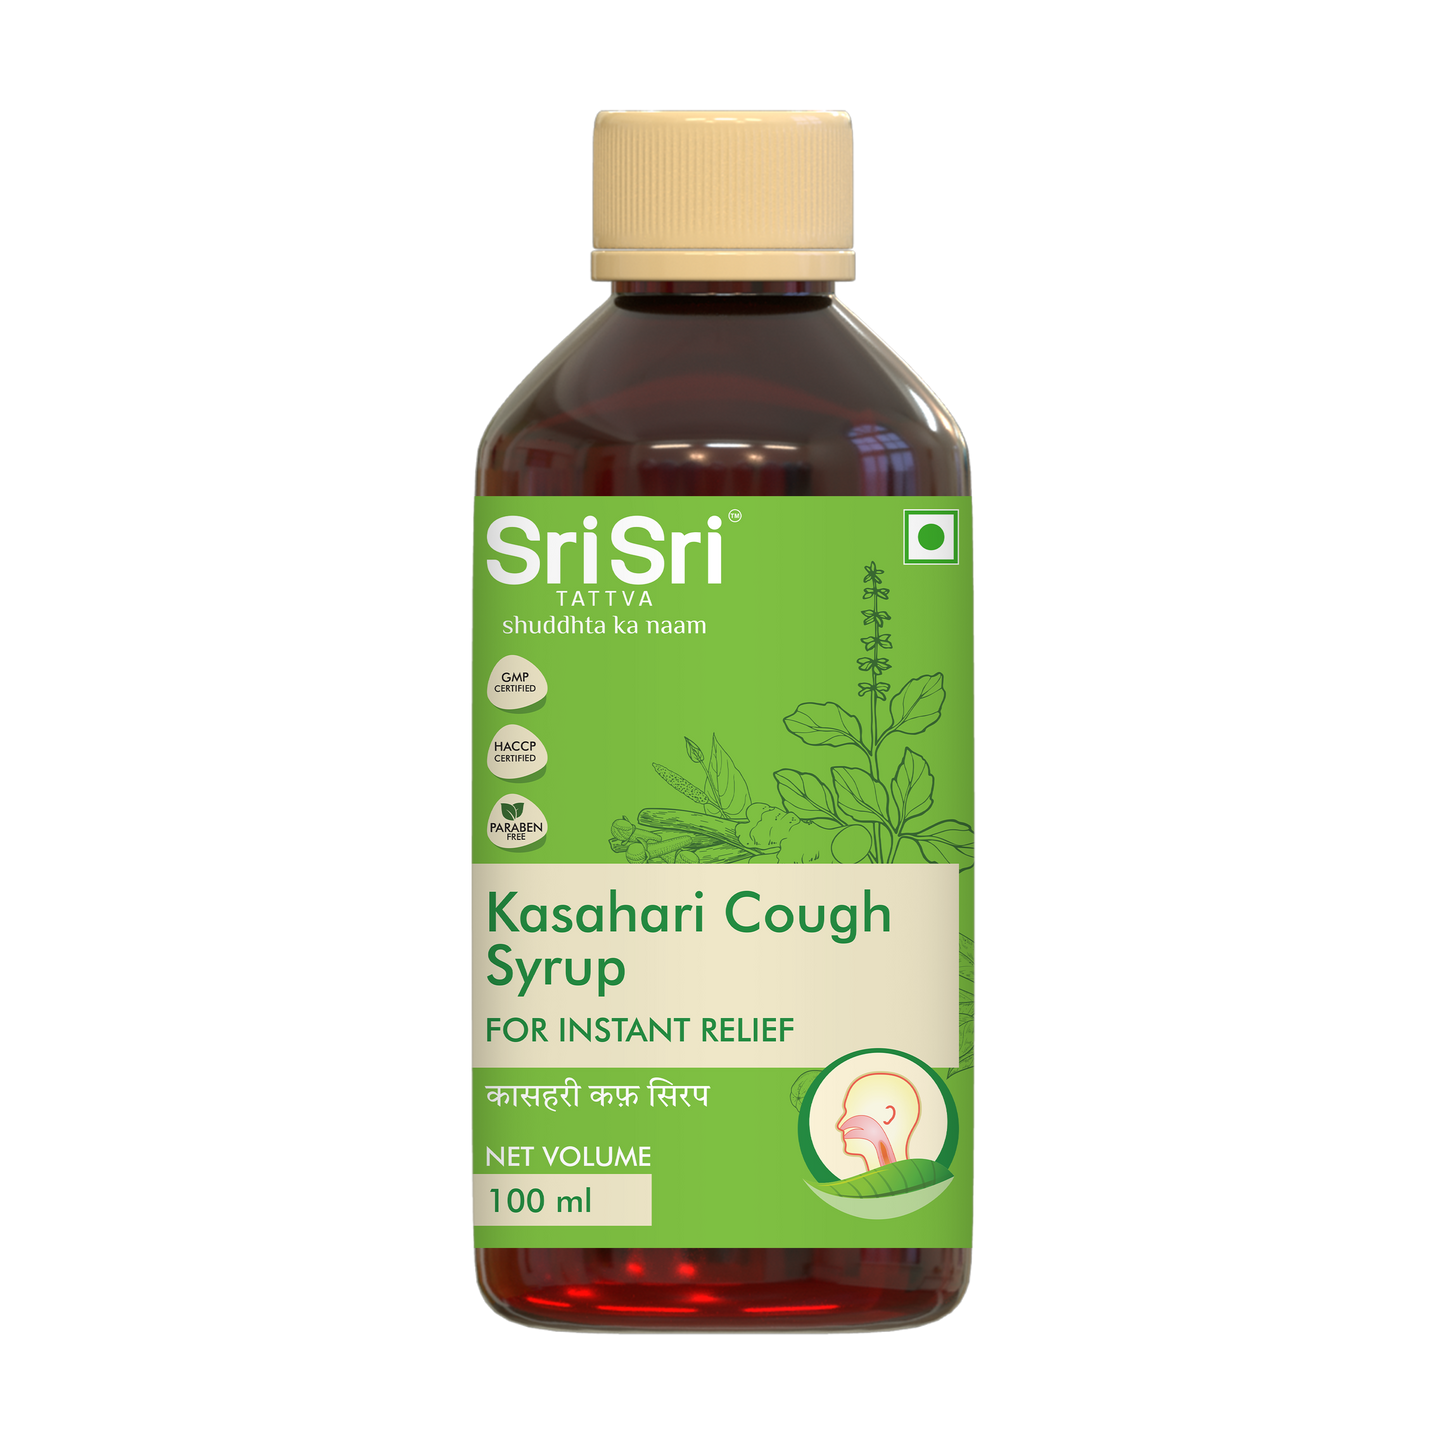 Kasahari Cough Syrup | A Unique Herbal Formulation | Offers Quick Relief From Both Dry And Allergic Cough | 100 ml